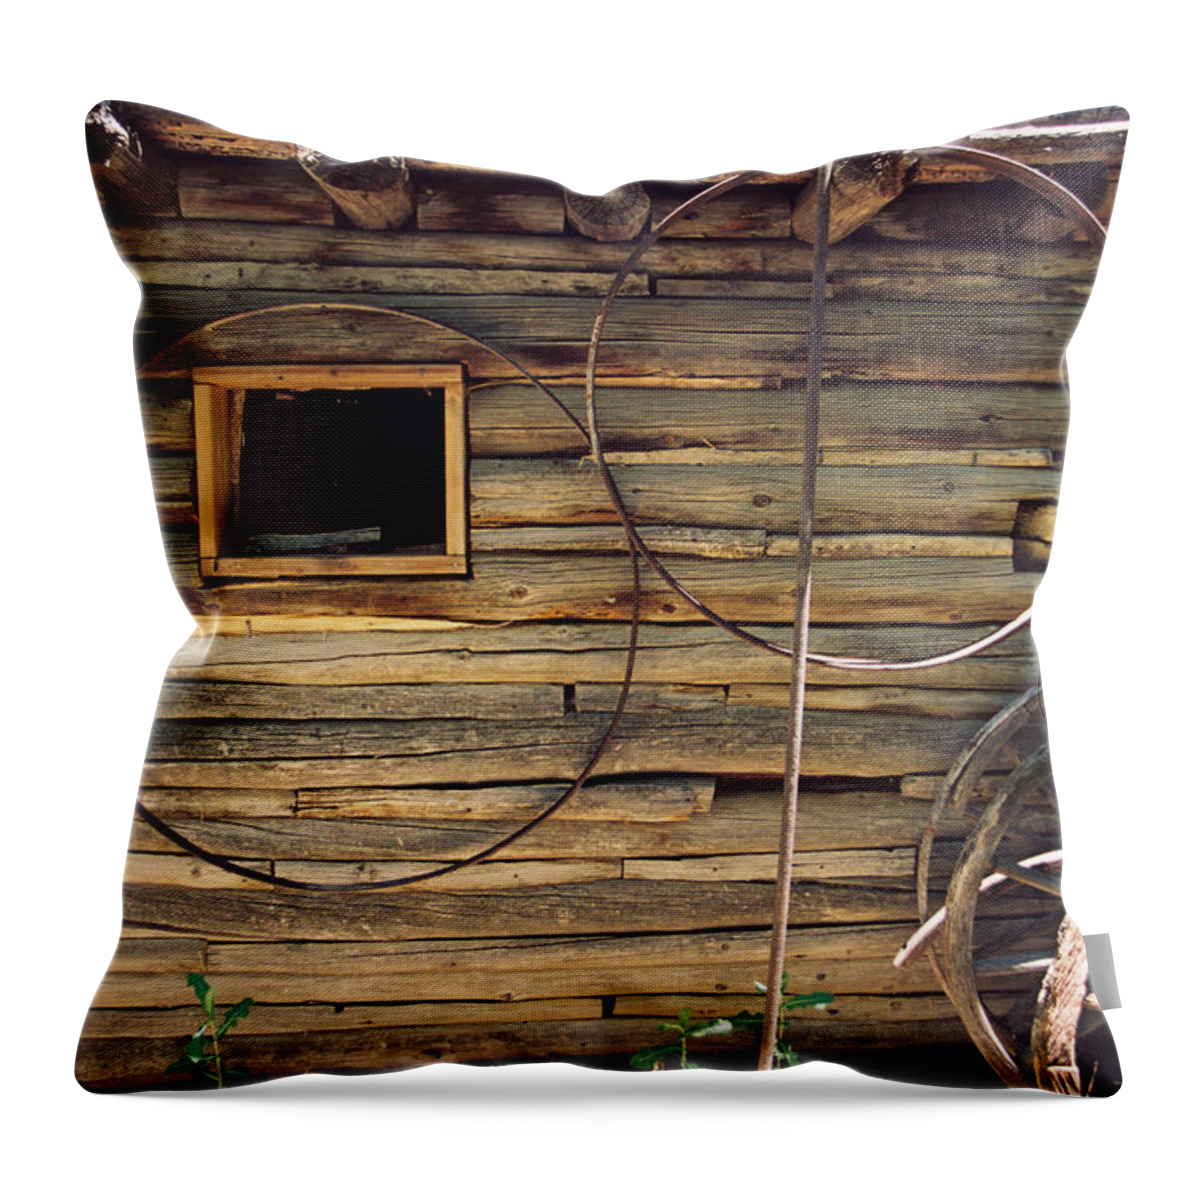 Santa Fe Throw Pillow featuring the photograph Carreteria Wall by Ron Weathers